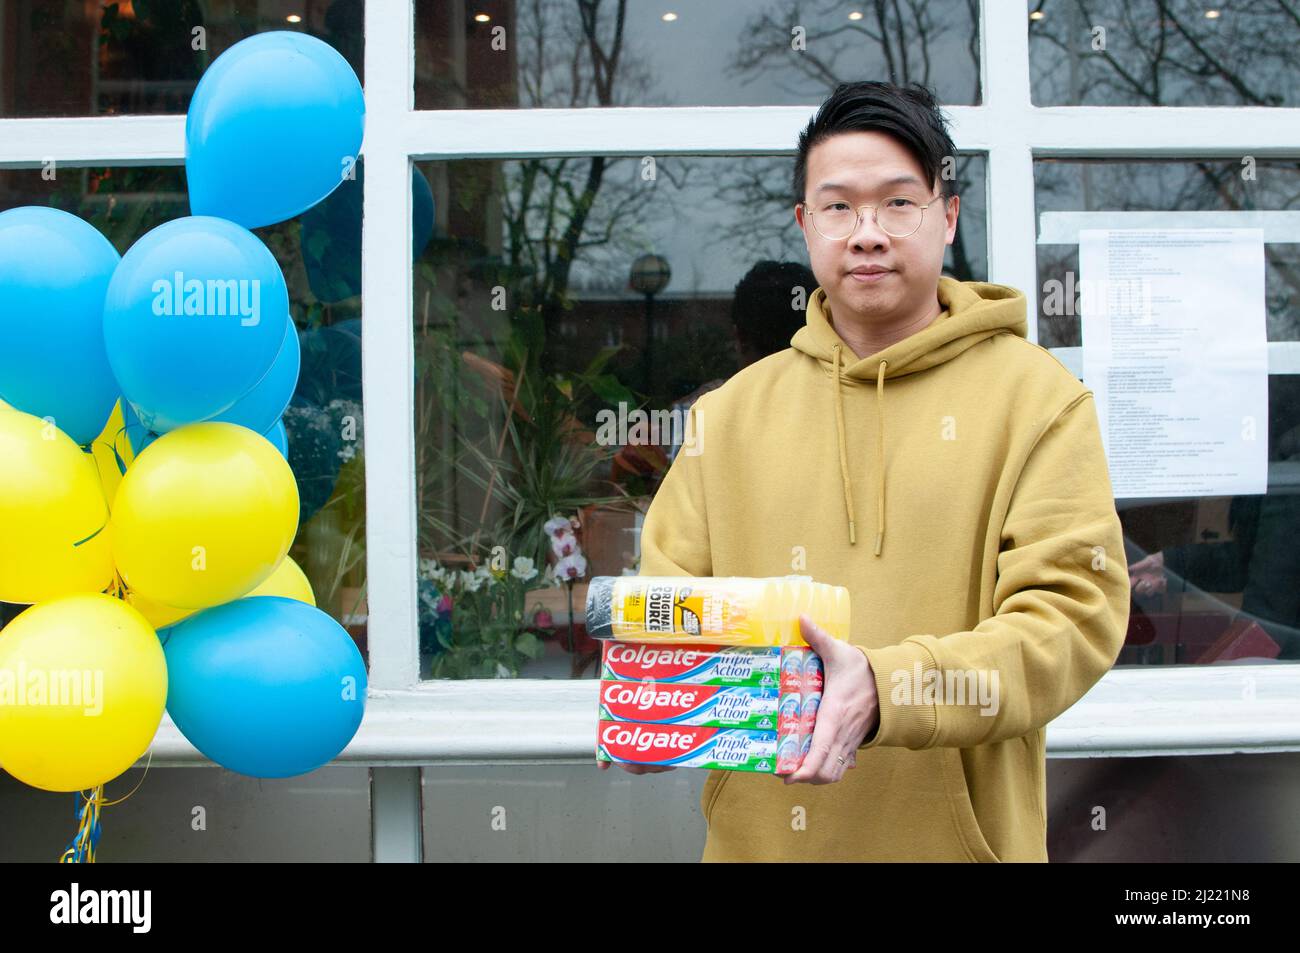 Jeffrey Lau (aged 32) from Hong Kong outside Prosperity restaurant, Twickenham, UK. The cafe has become a hub for donations for Ukraine since the start of the war on 24th February 2022.. 'We like to help those in need under totalitarian rule. We have a similar background - a totalitarian government. Same as in Honk Kong two years ago - s fight for freedom'. Credit: Tricia de Courcy Ling/Alamy Live News Stock Photo